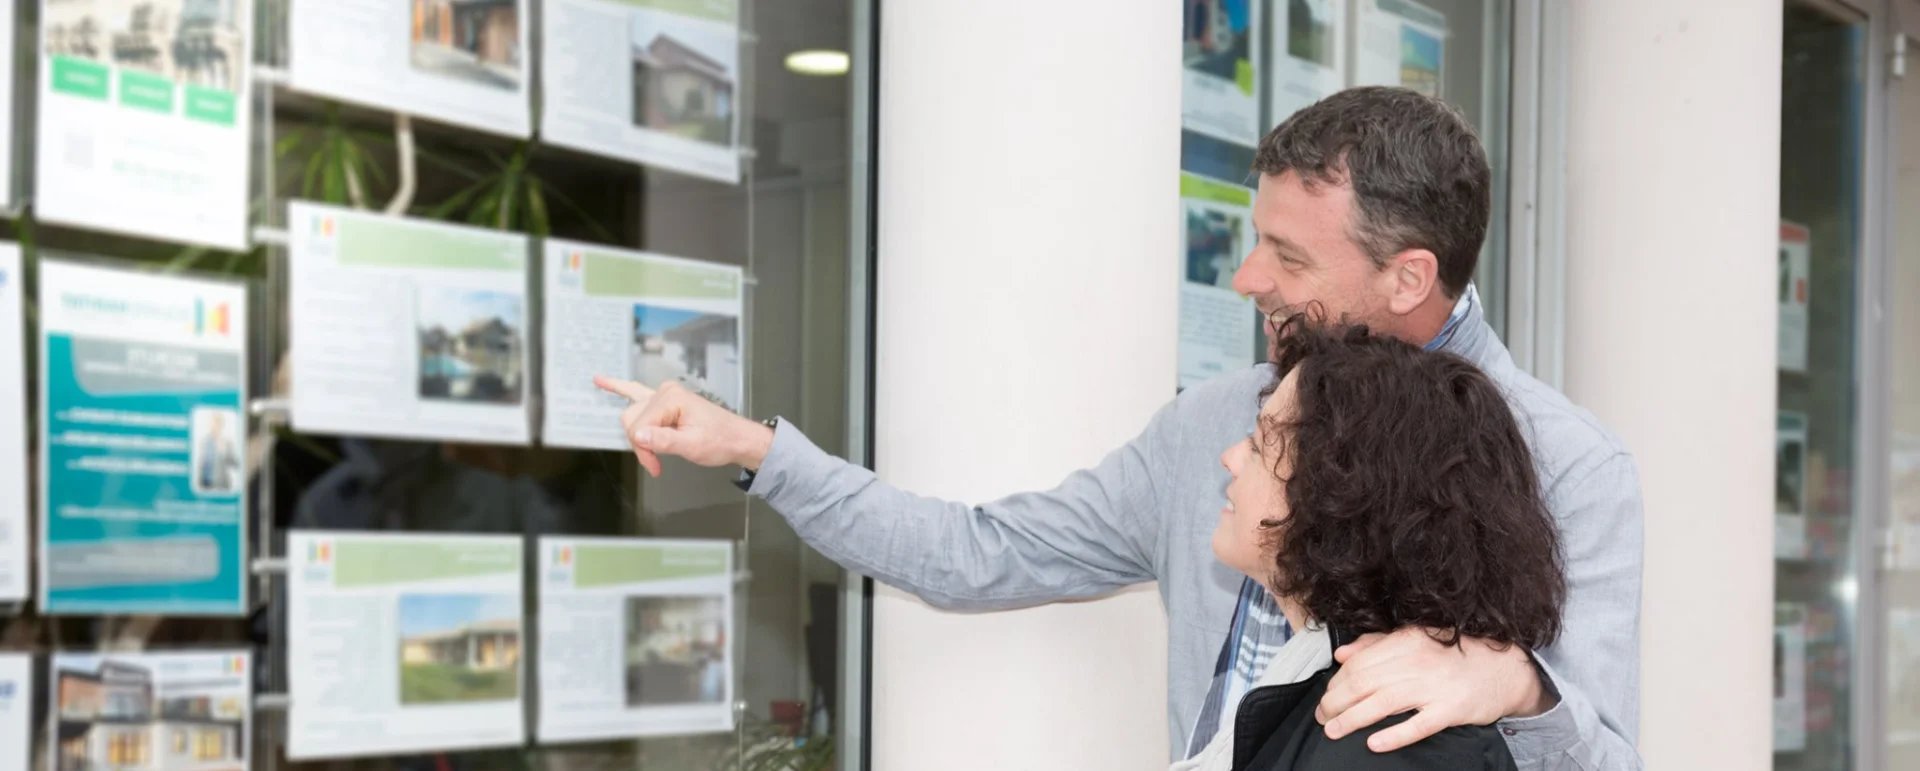 Couple looking at house listings in shop